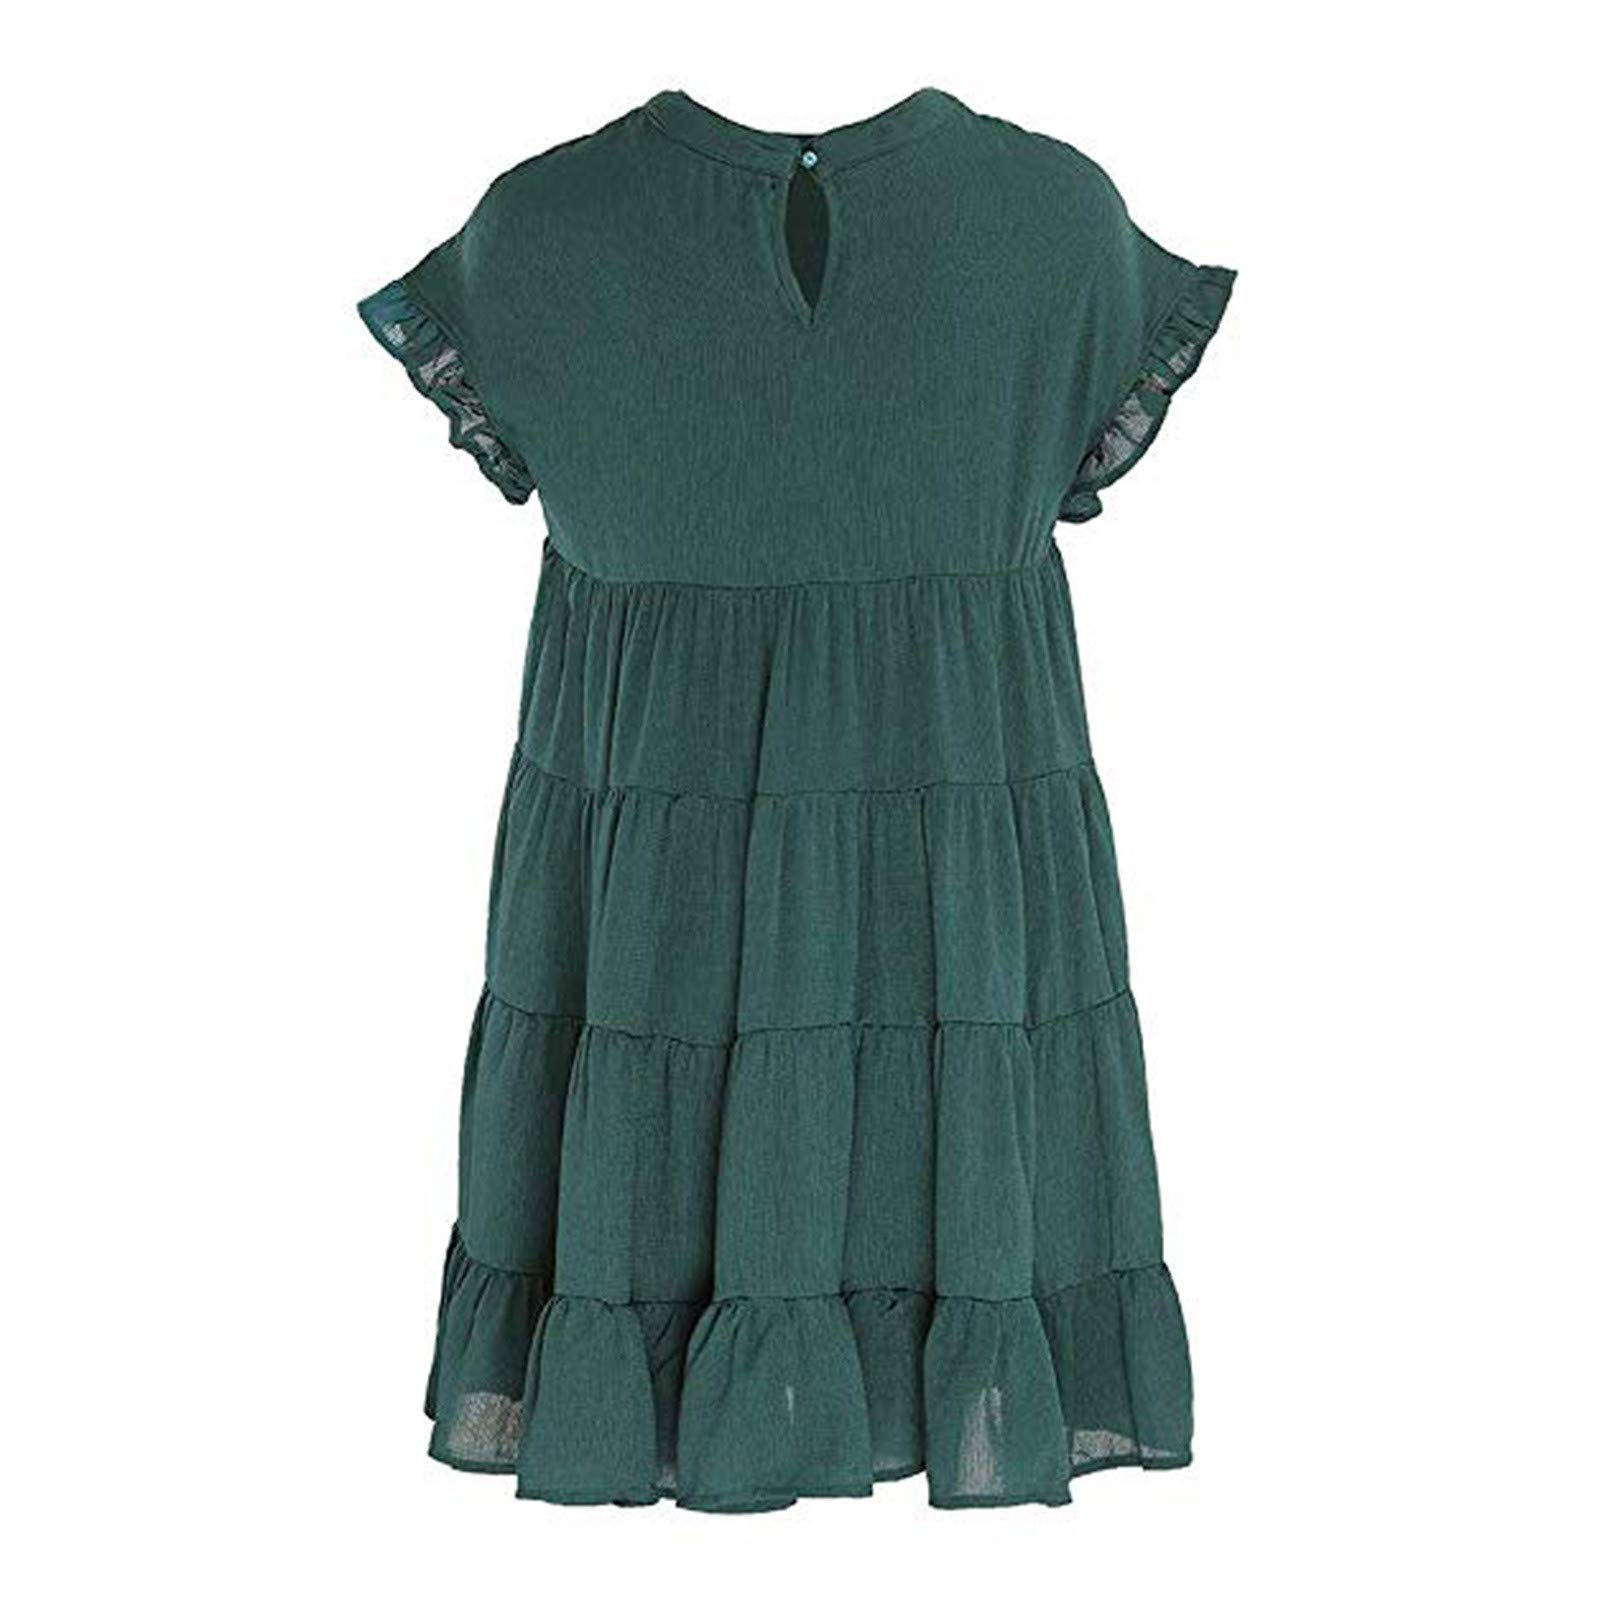 2023 Women's Ruffle Sleeve Round Neck Mini Dress Summer Casual Solid Loose Short Flowy Pleated Dress Swing Party Dress